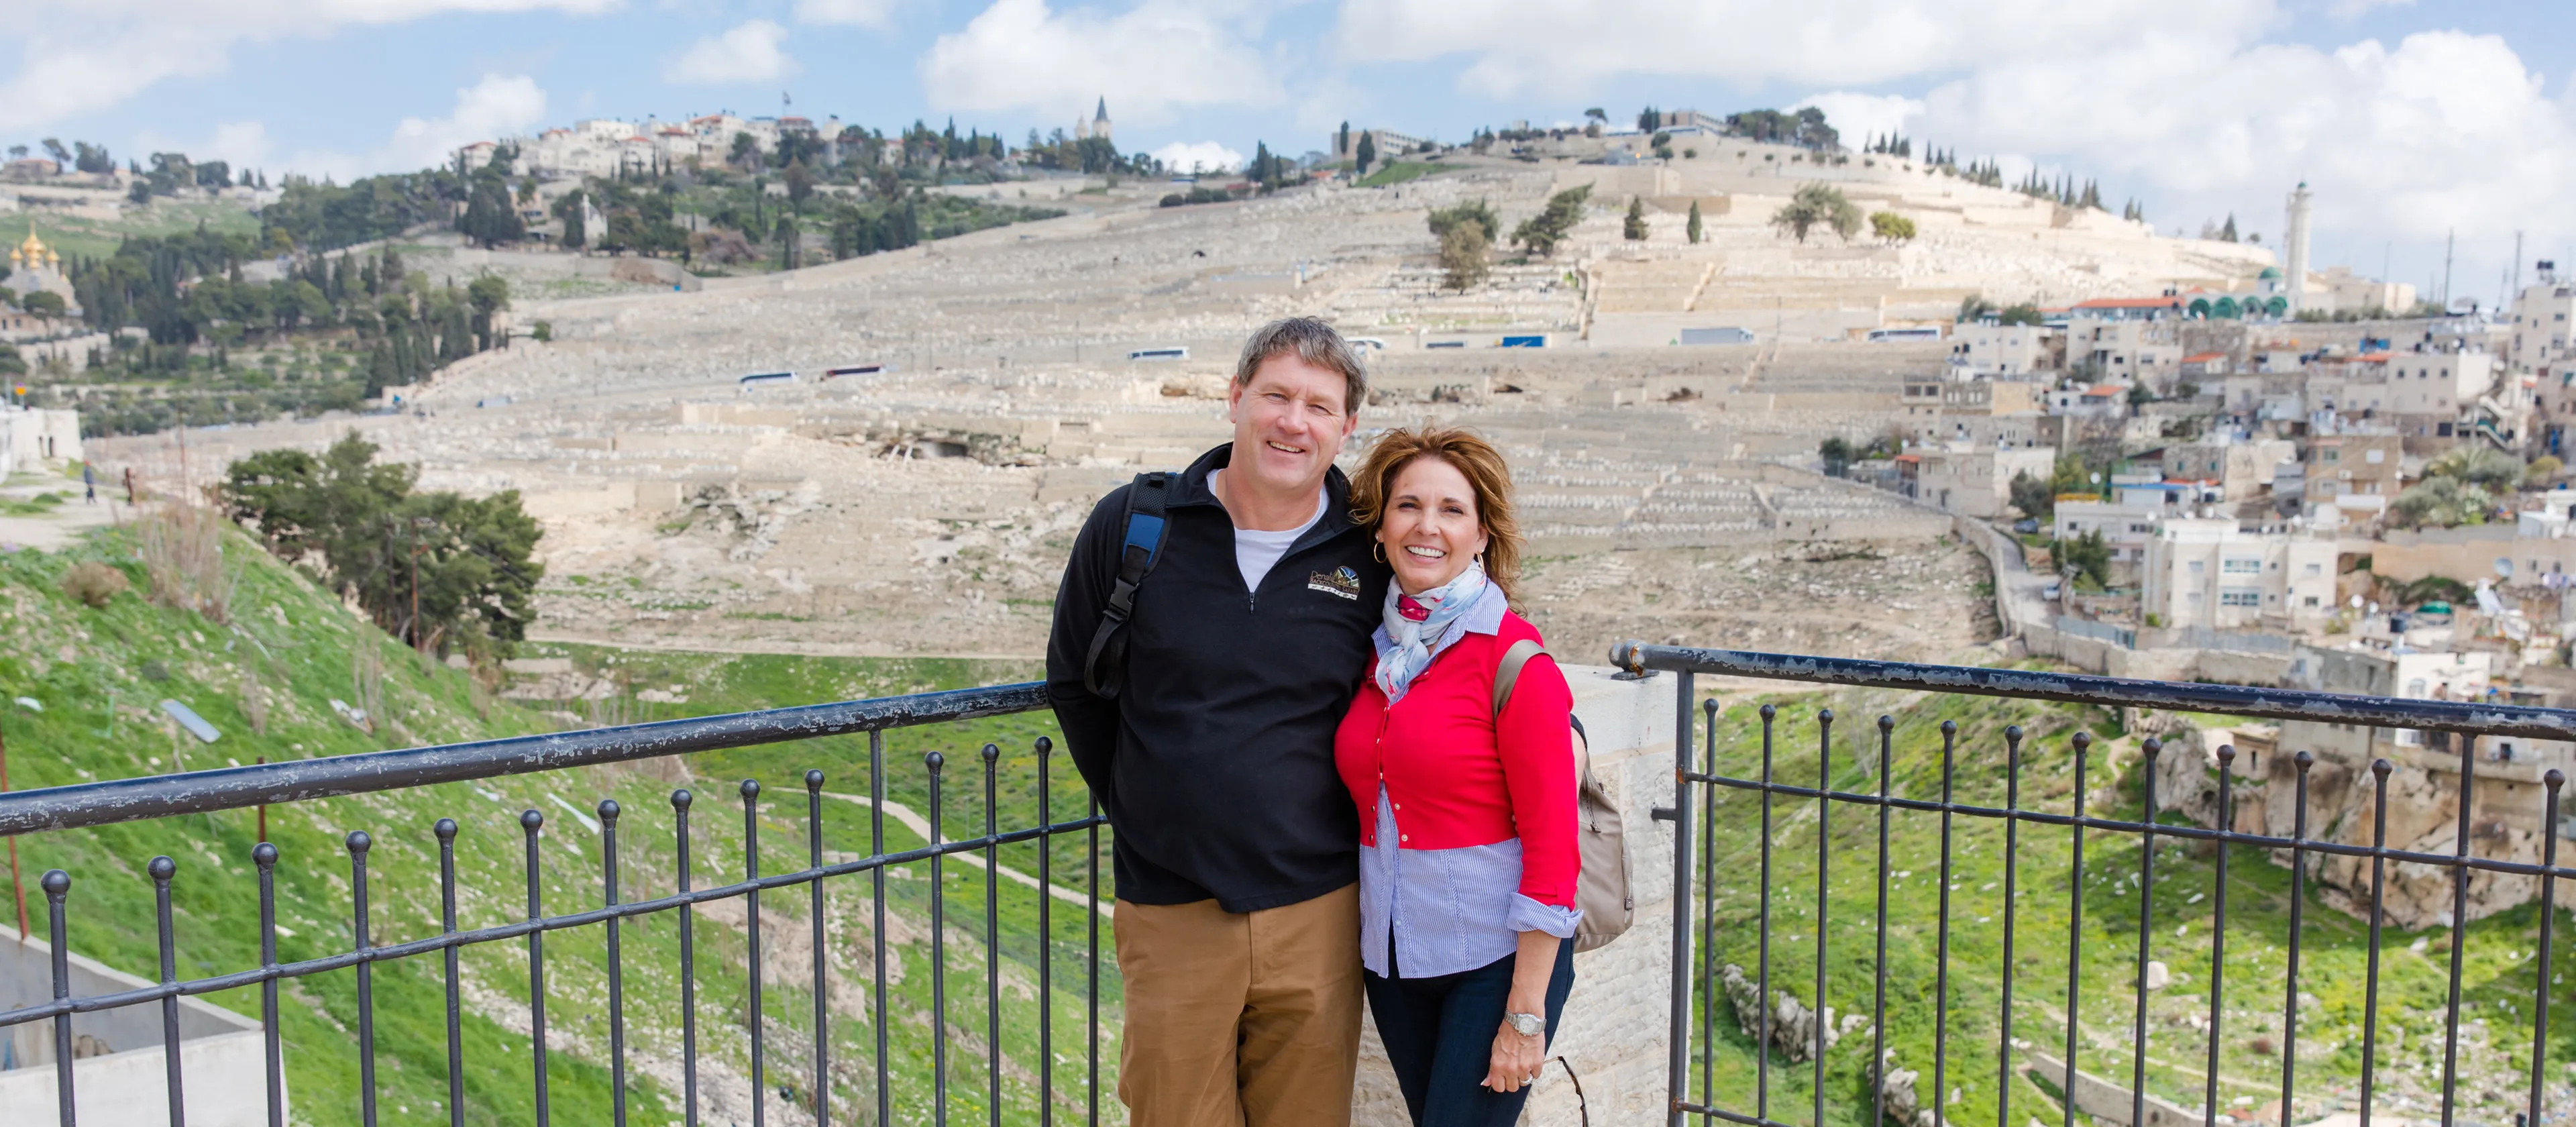 A couple standing together overlooking Israel